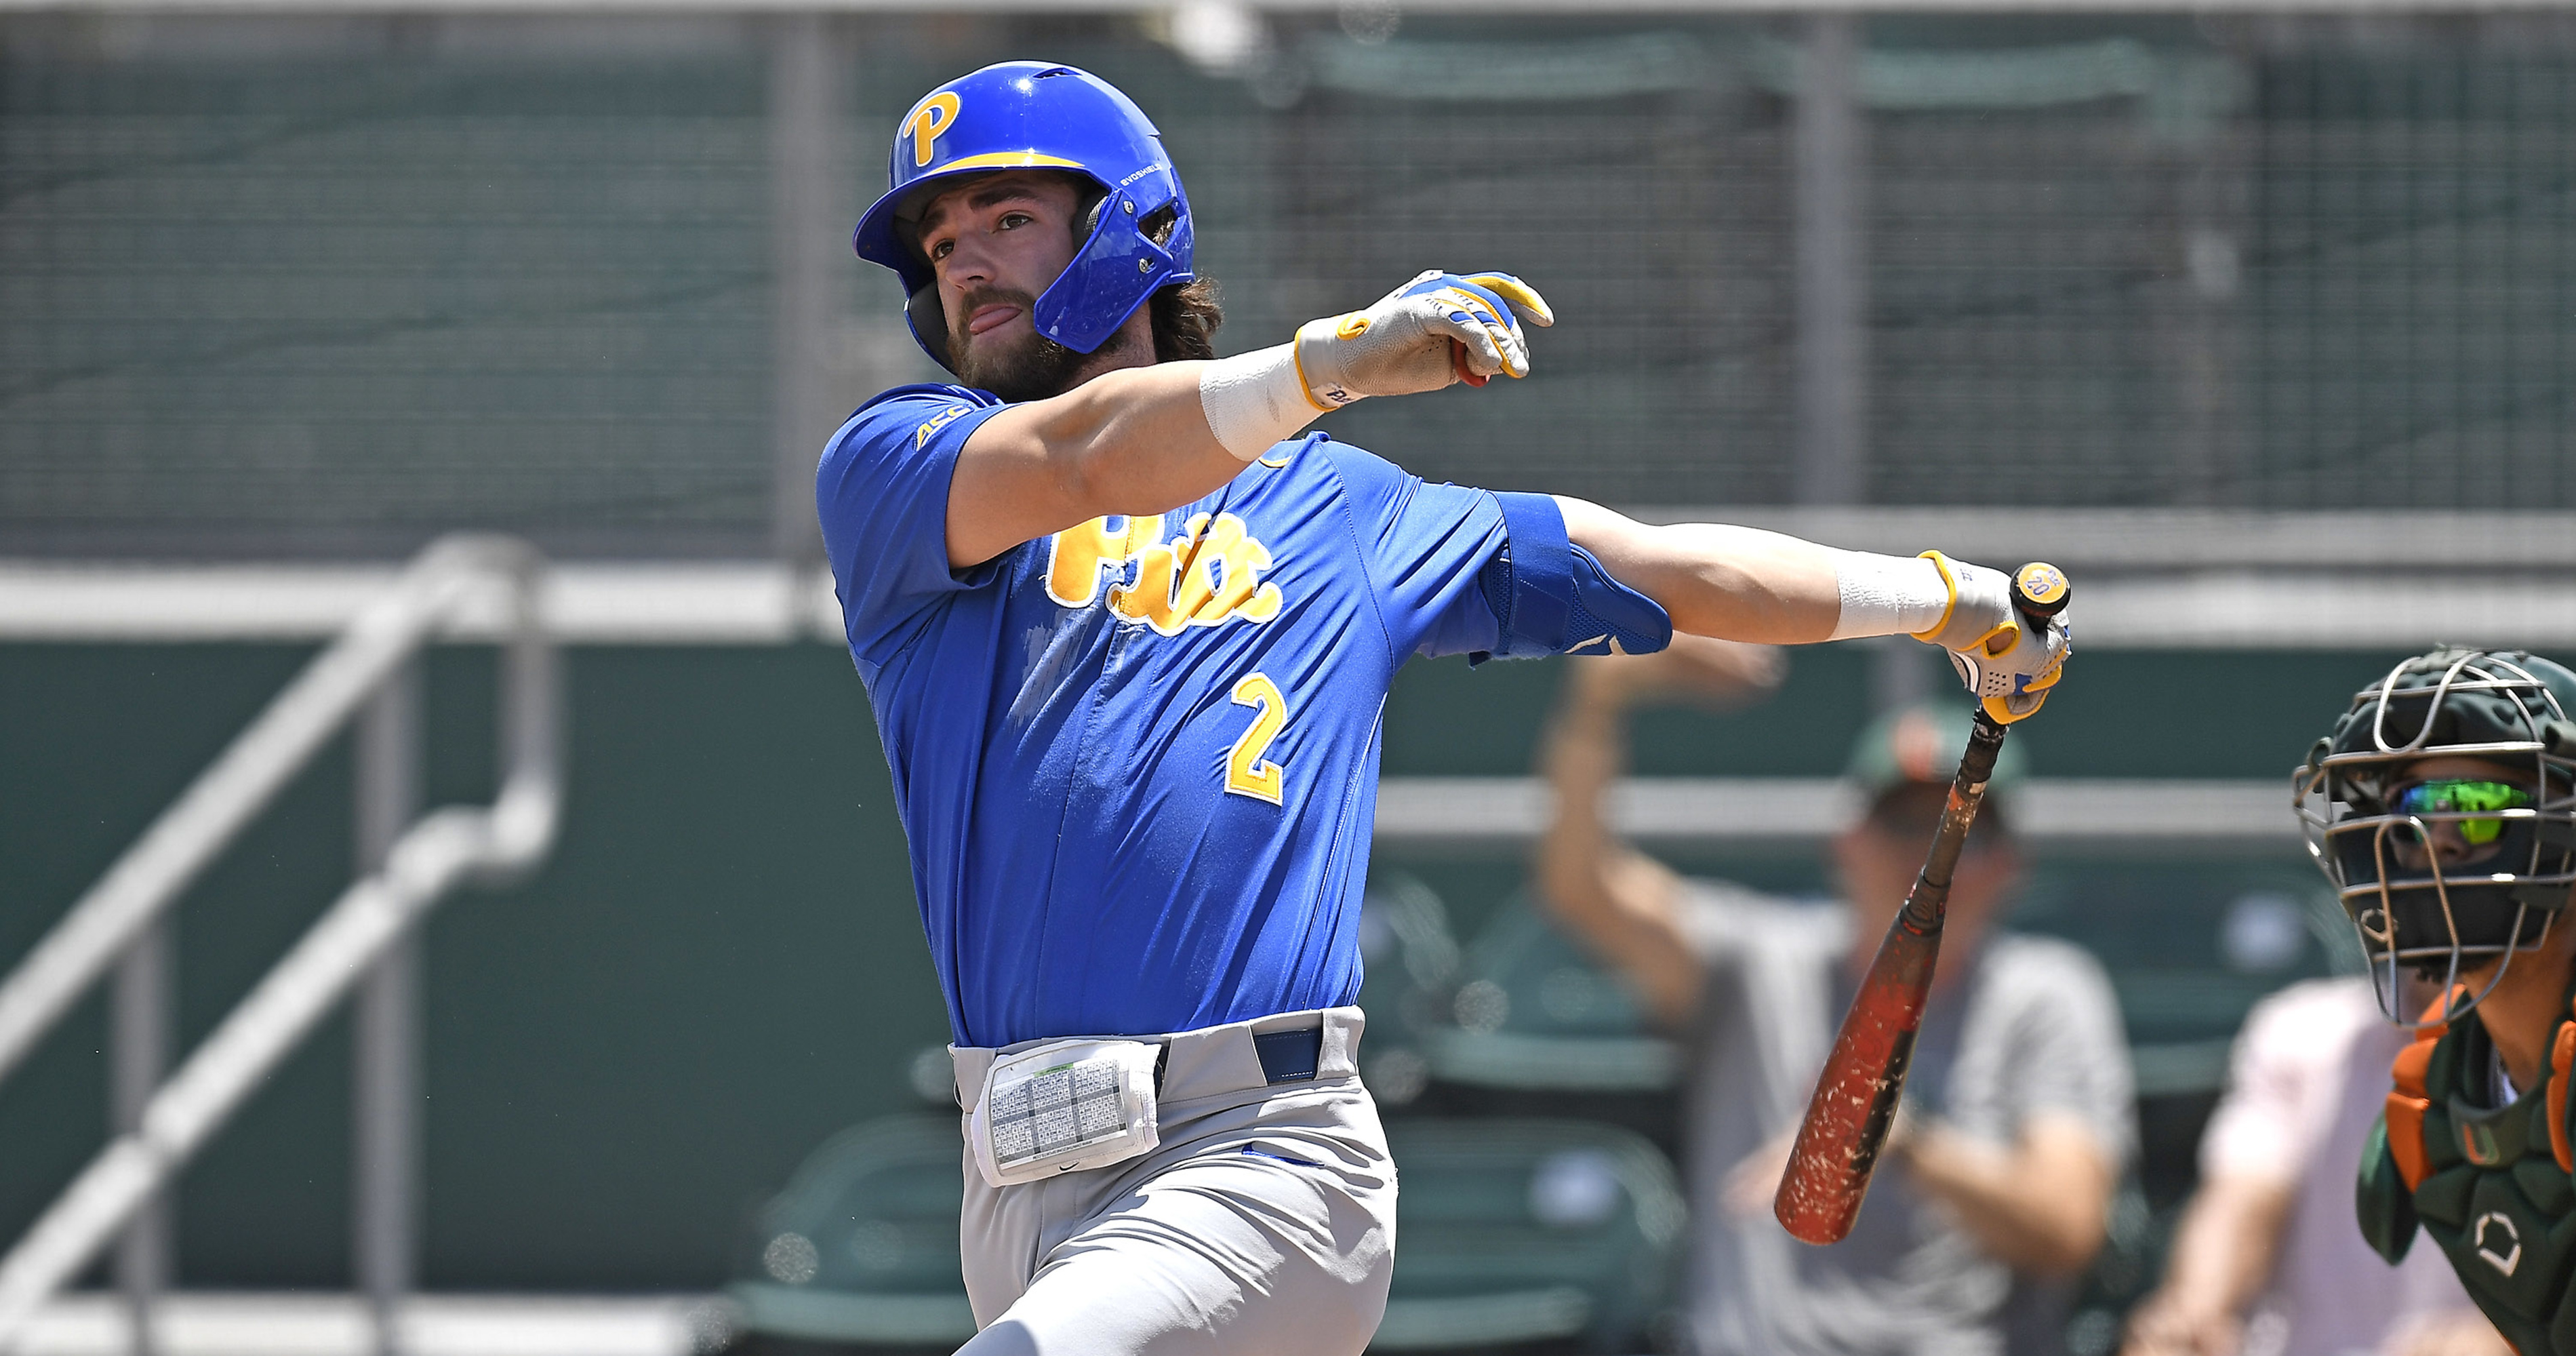 ACC Baseball Tournament 2022 Wednesday Scores, Updated Bracket and